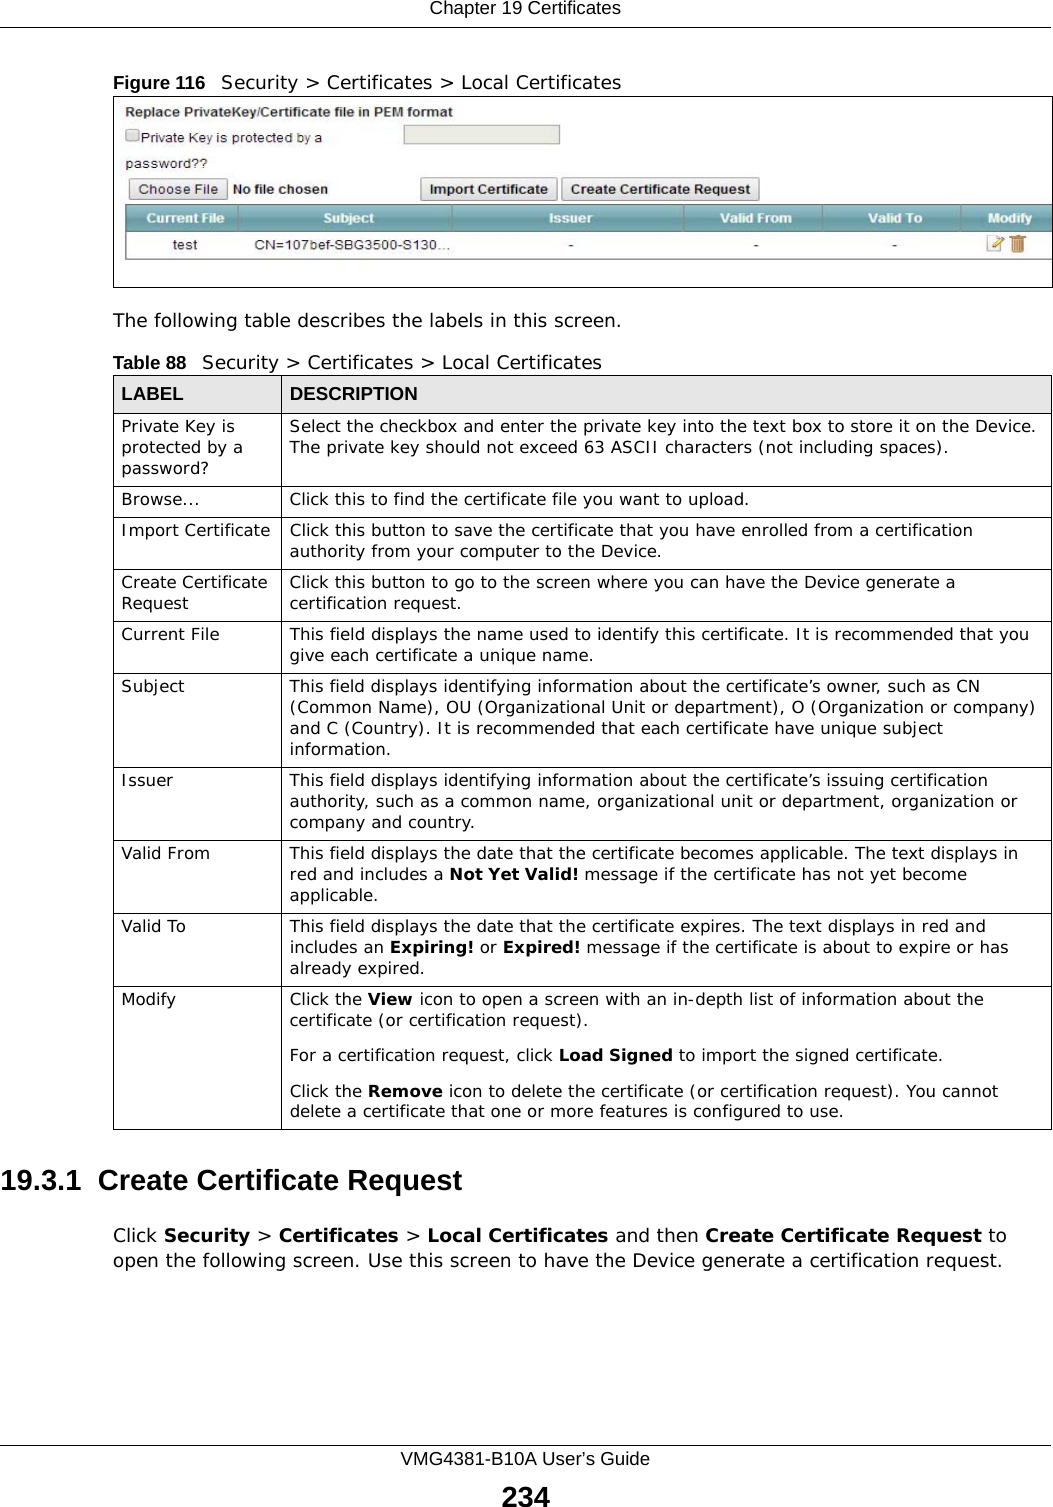 Chapter 19 CertificatesVMG4381-B10A User’s Guide234Figure 116   Security &gt; Certificates &gt; Local Certificates The following table describes the labels in this screen. 19.3.1  Create Certificate Request Click Security &gt; Certificates &gt; Local Certificates and then Create Certificate Request to open the following screen. Use this screen to have the Device generate a certification request.Table 88   Security &gt; Certificates &gt; Local CertificatesLABEL DESCRIPTIONPrivate Key is protected by a password?Select the checkbox and enter the private key into the text box to store it on the Device. The private key should not exceed 63 ASCII characters (not including spaces). Browse... Click this to find the certificate file you want to upload. Import Certificate Click this button to save the certificate that you have enrolled from a certification authority from your computer to the Device.Create Certificate Request Click this button to go to the screen where you can have the Device generate a certification request.Current File This field displays the name used to identify this certificate. It is recommended that you give each certificate a unique name. Subject This field displays identifying information about the certificate’s owner, such as CN (Common Name), OU (Organizational Unit or department), O (Organization or company) and C (Country). It is recommended that each certificate have unique subject information. Issuer This field displays identifying information about the certificate’s issuing certification authority, such as a common name, organizational unit or department, organization or company and country.Valid From This field displays the date that the certificate becomes applicable. The text displays in red and includes a Not Yet Valid! message if the certificate has not yet become applicable.Valid To This field displays the date that the certificate expires. The text displays in red and includes an Expiring! or Expired! message if the certificate is about to expire or has already expired.Modify Click the View icon to open a screen with an in-depth list of information about the certificate (or certification request).For a certification request, click Load Signed to import the signed certificate.Click the Remove icon to delete the certificate (or certification request). You cannot delete a certificate that one or more features is configured to use.